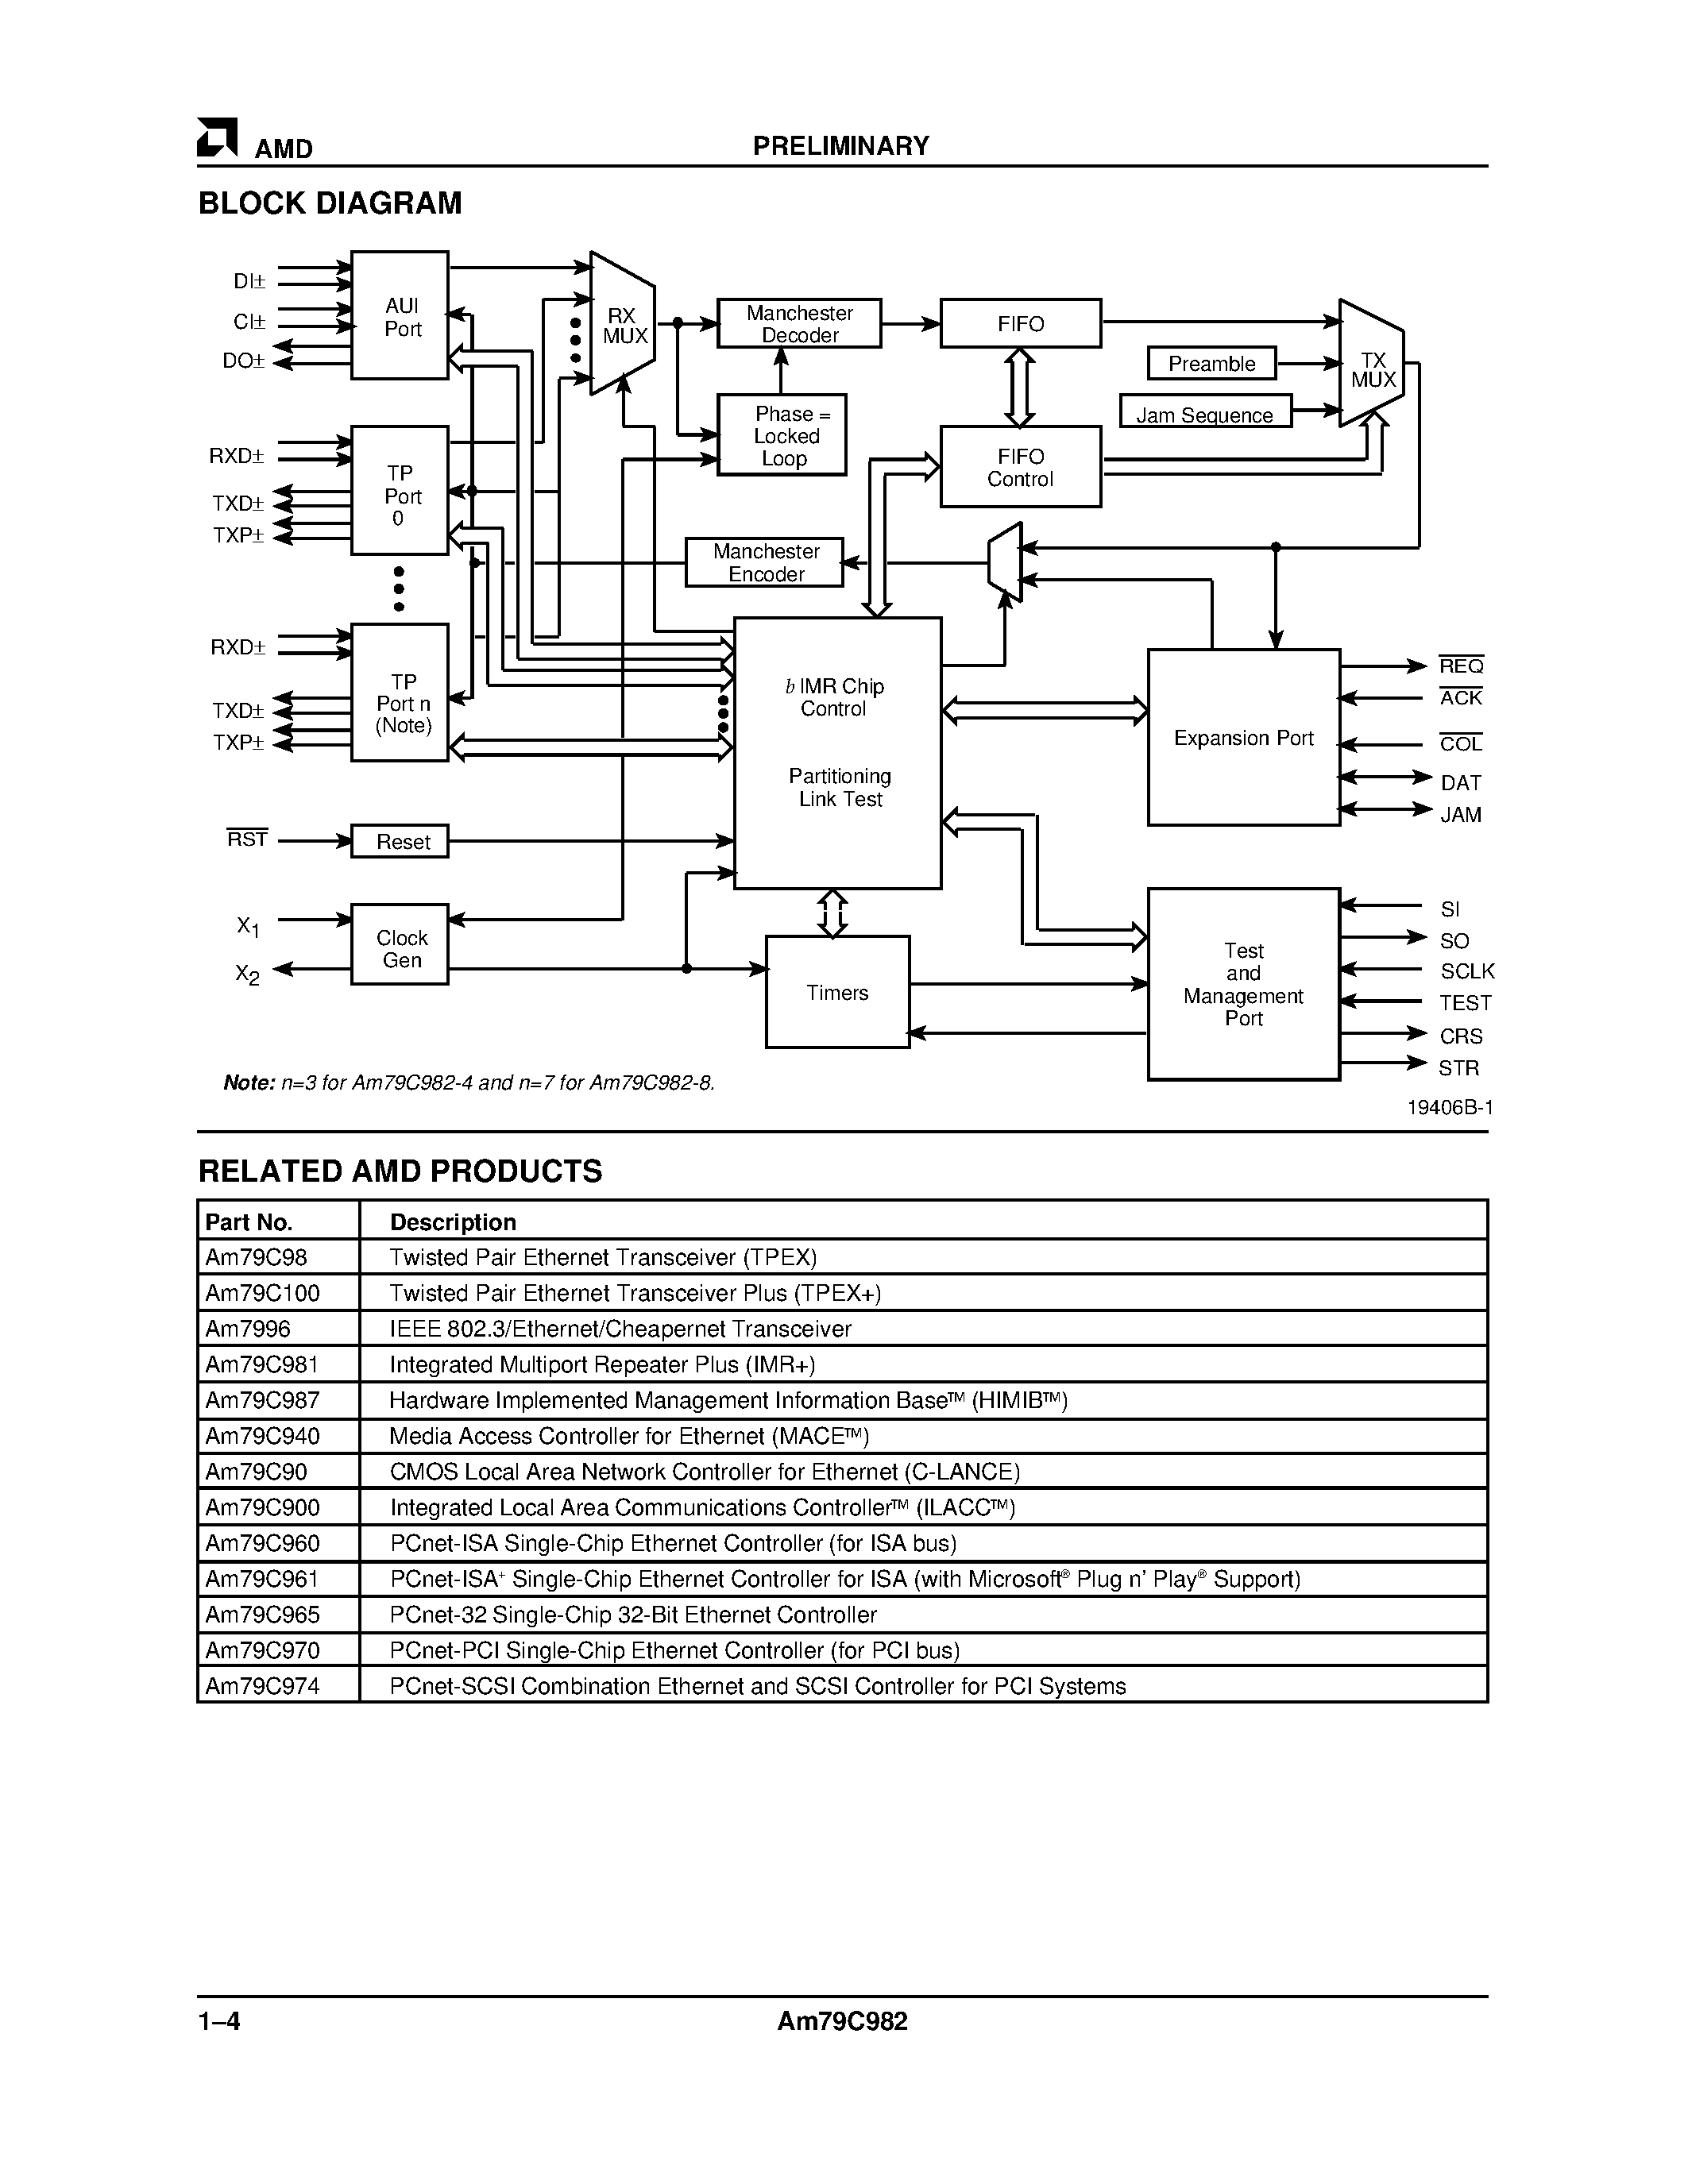 Datasheet Am79C982-8JC - basic Integrated Multiport Repeater (bIMR) page 2